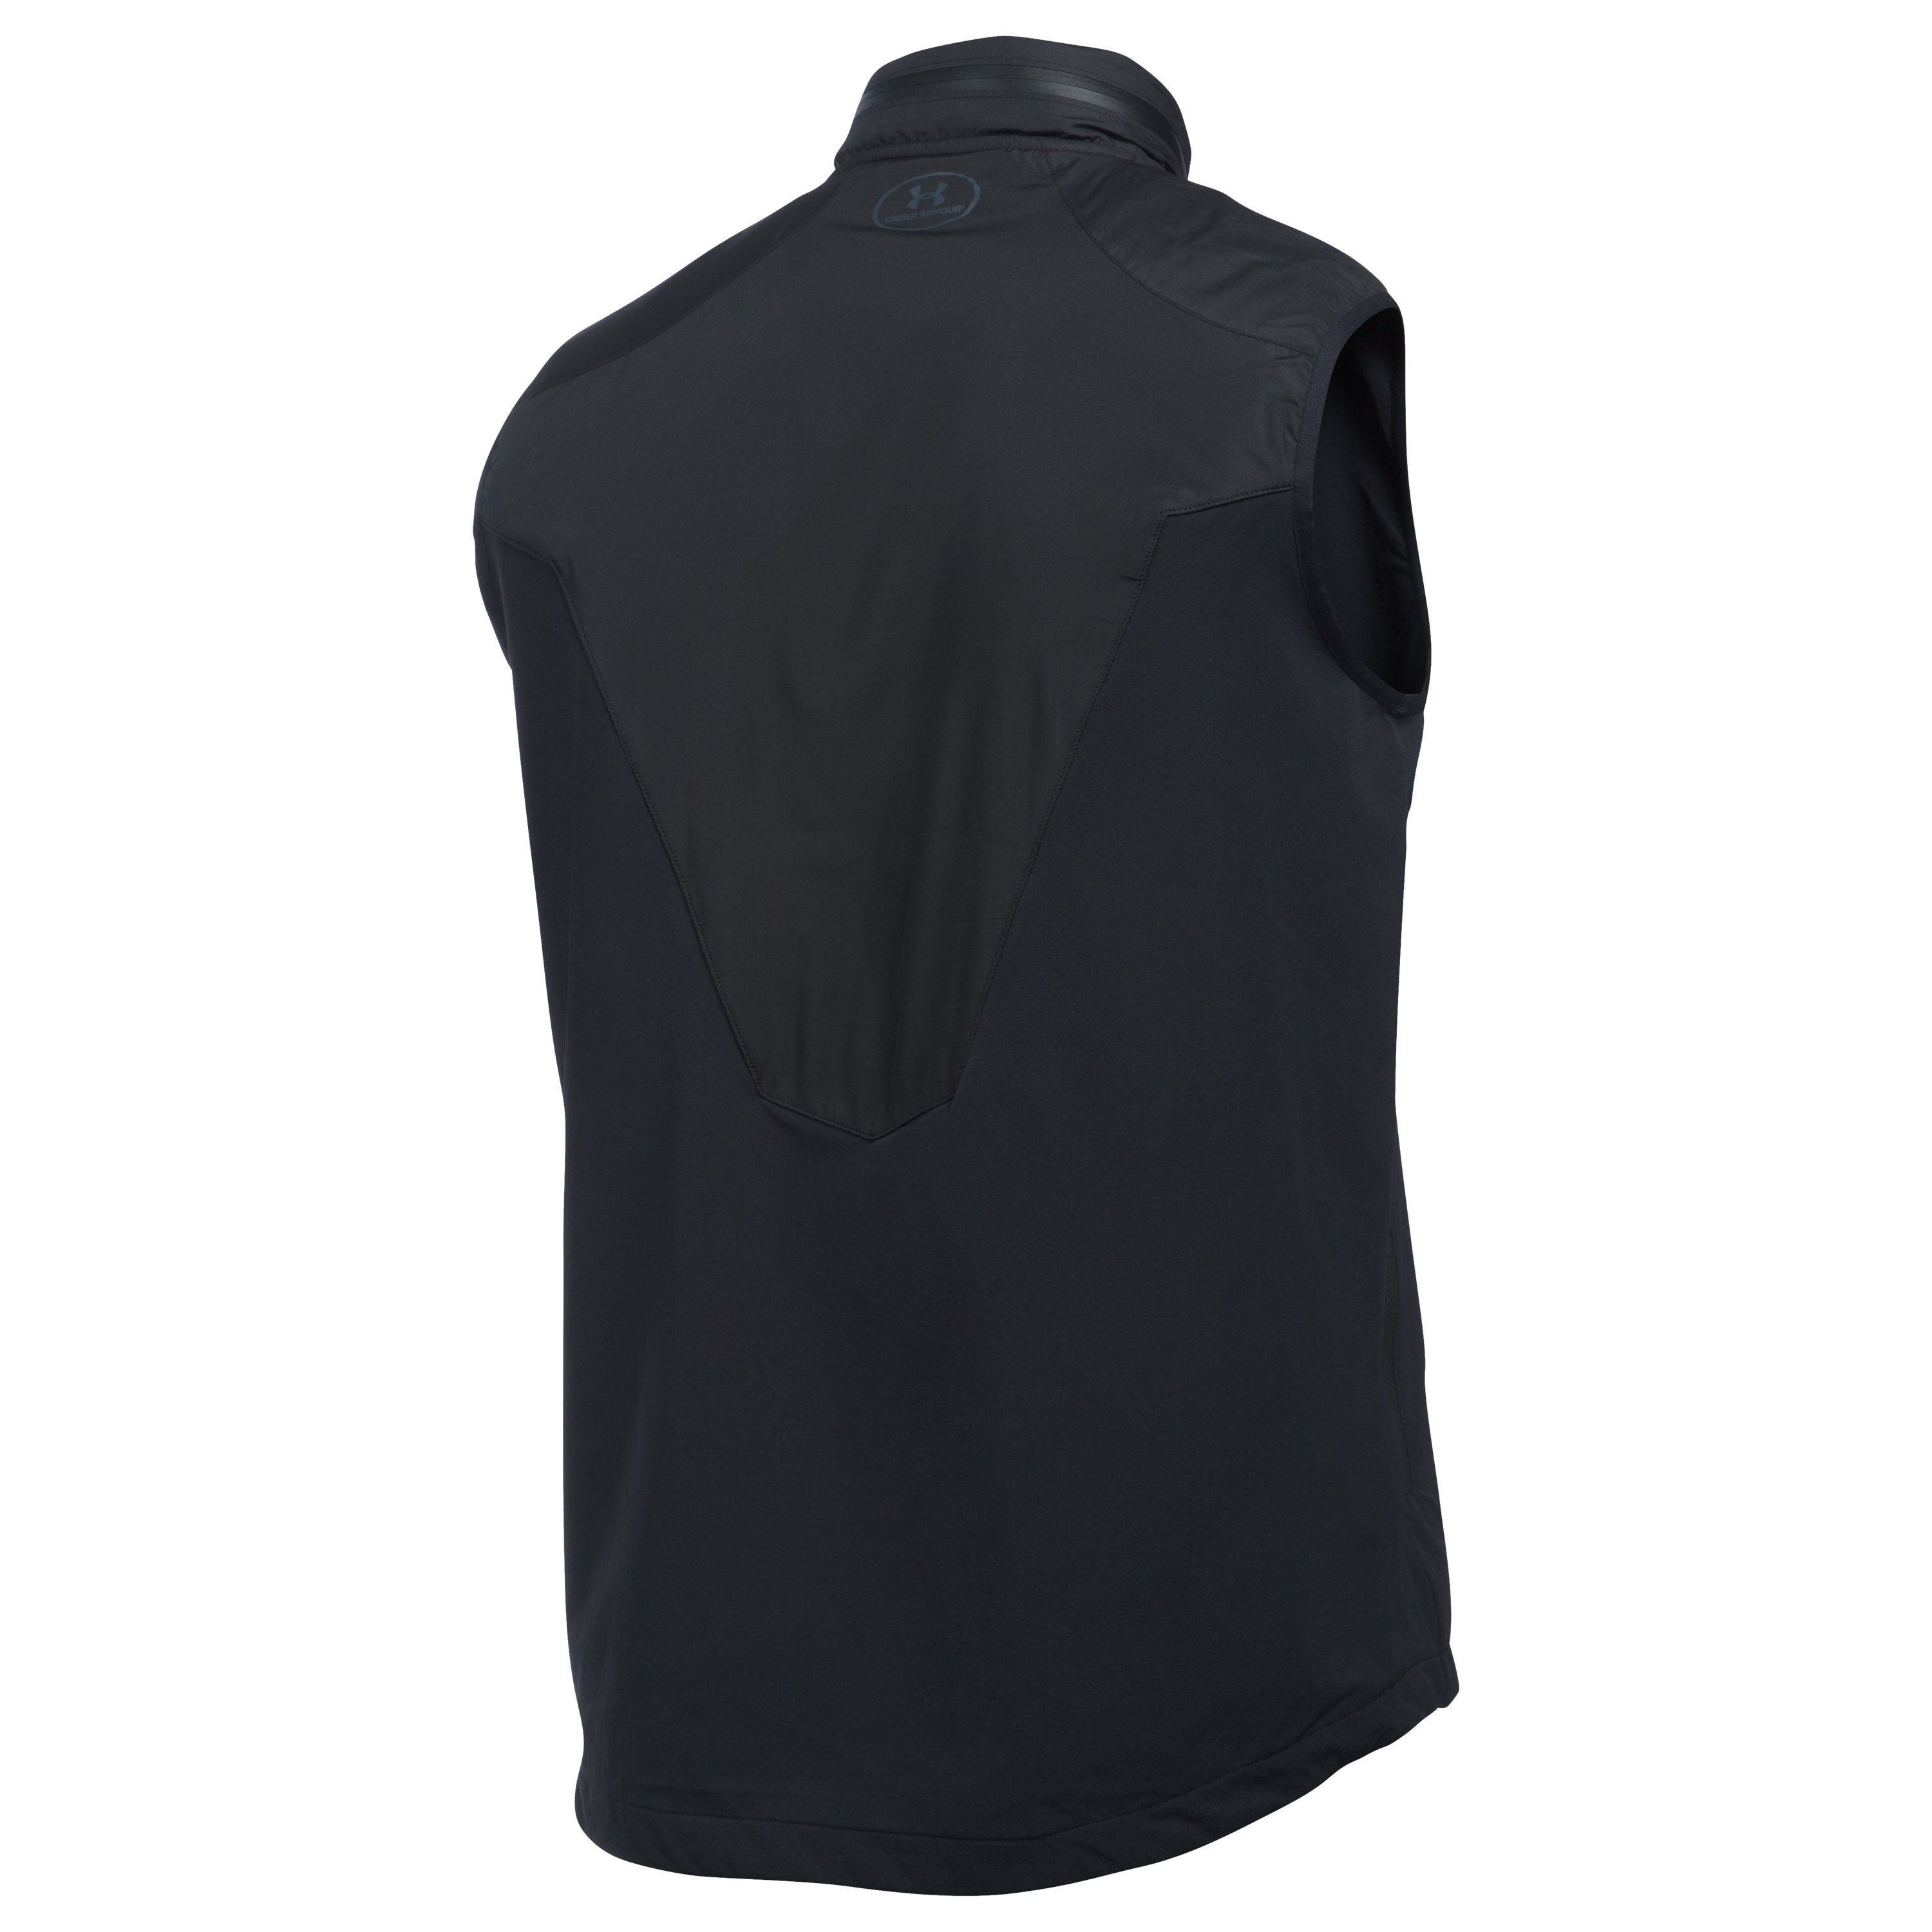 Under Armour Vest Storm Woven Insulated black